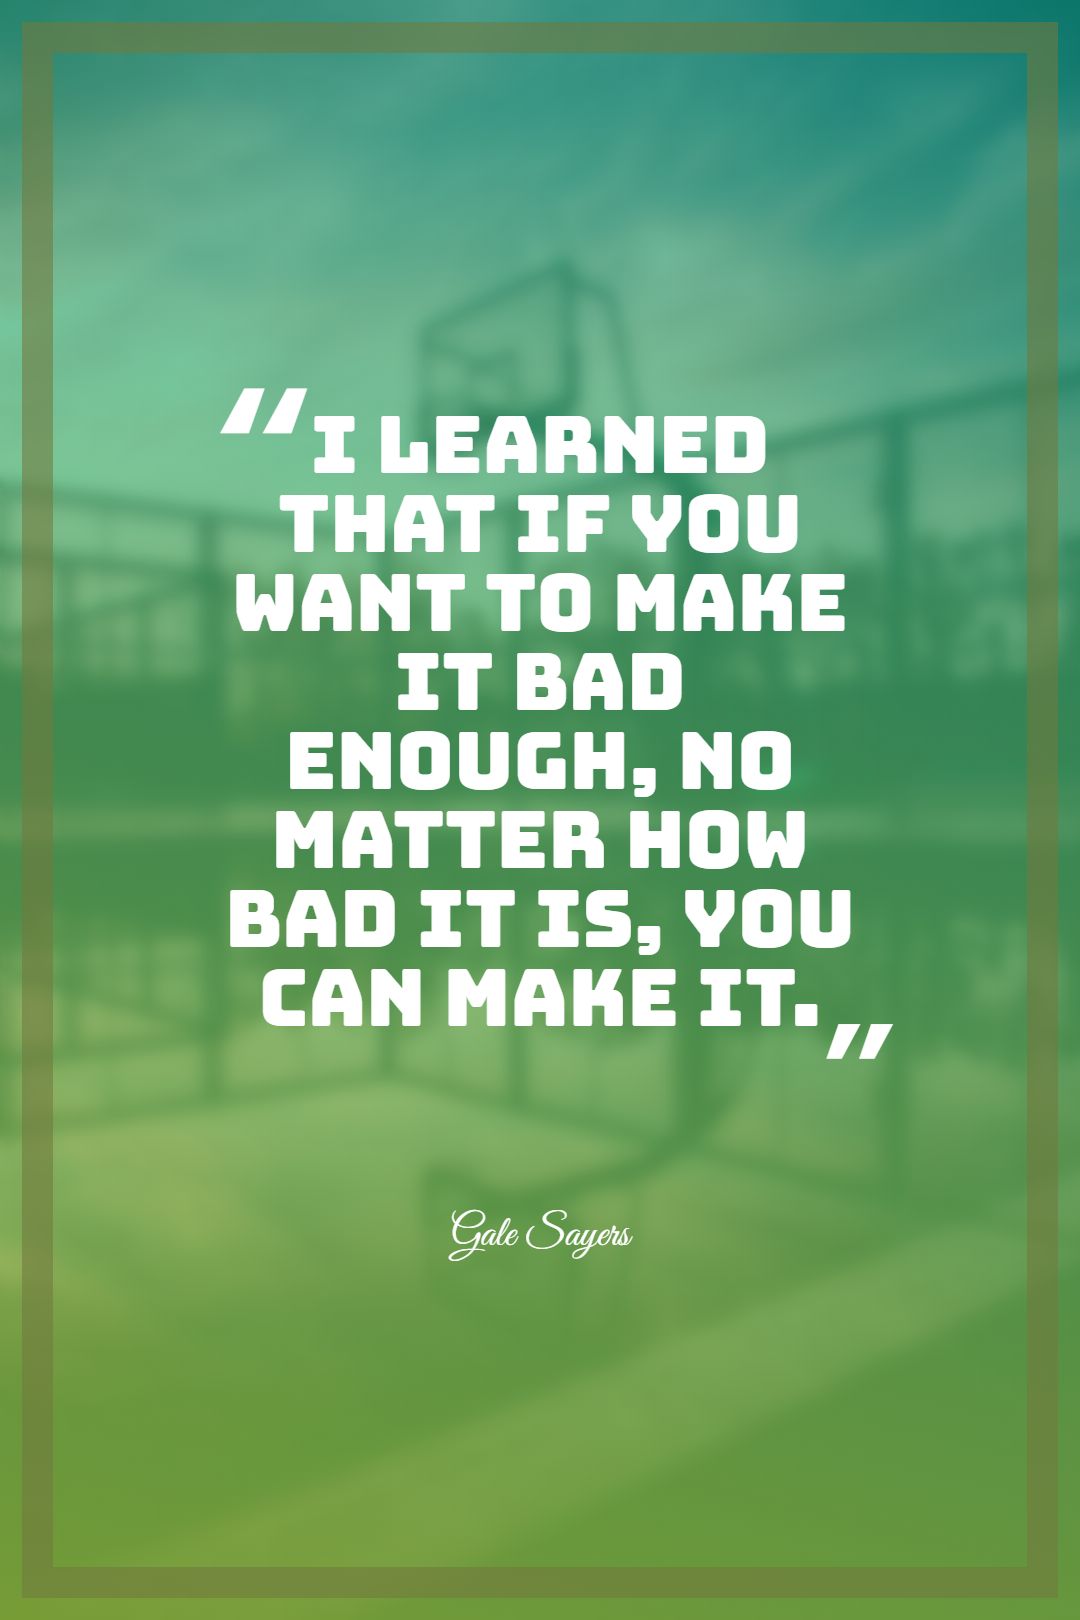 I learned that if you want to make it bad enough no matter how bad it is you can make it.